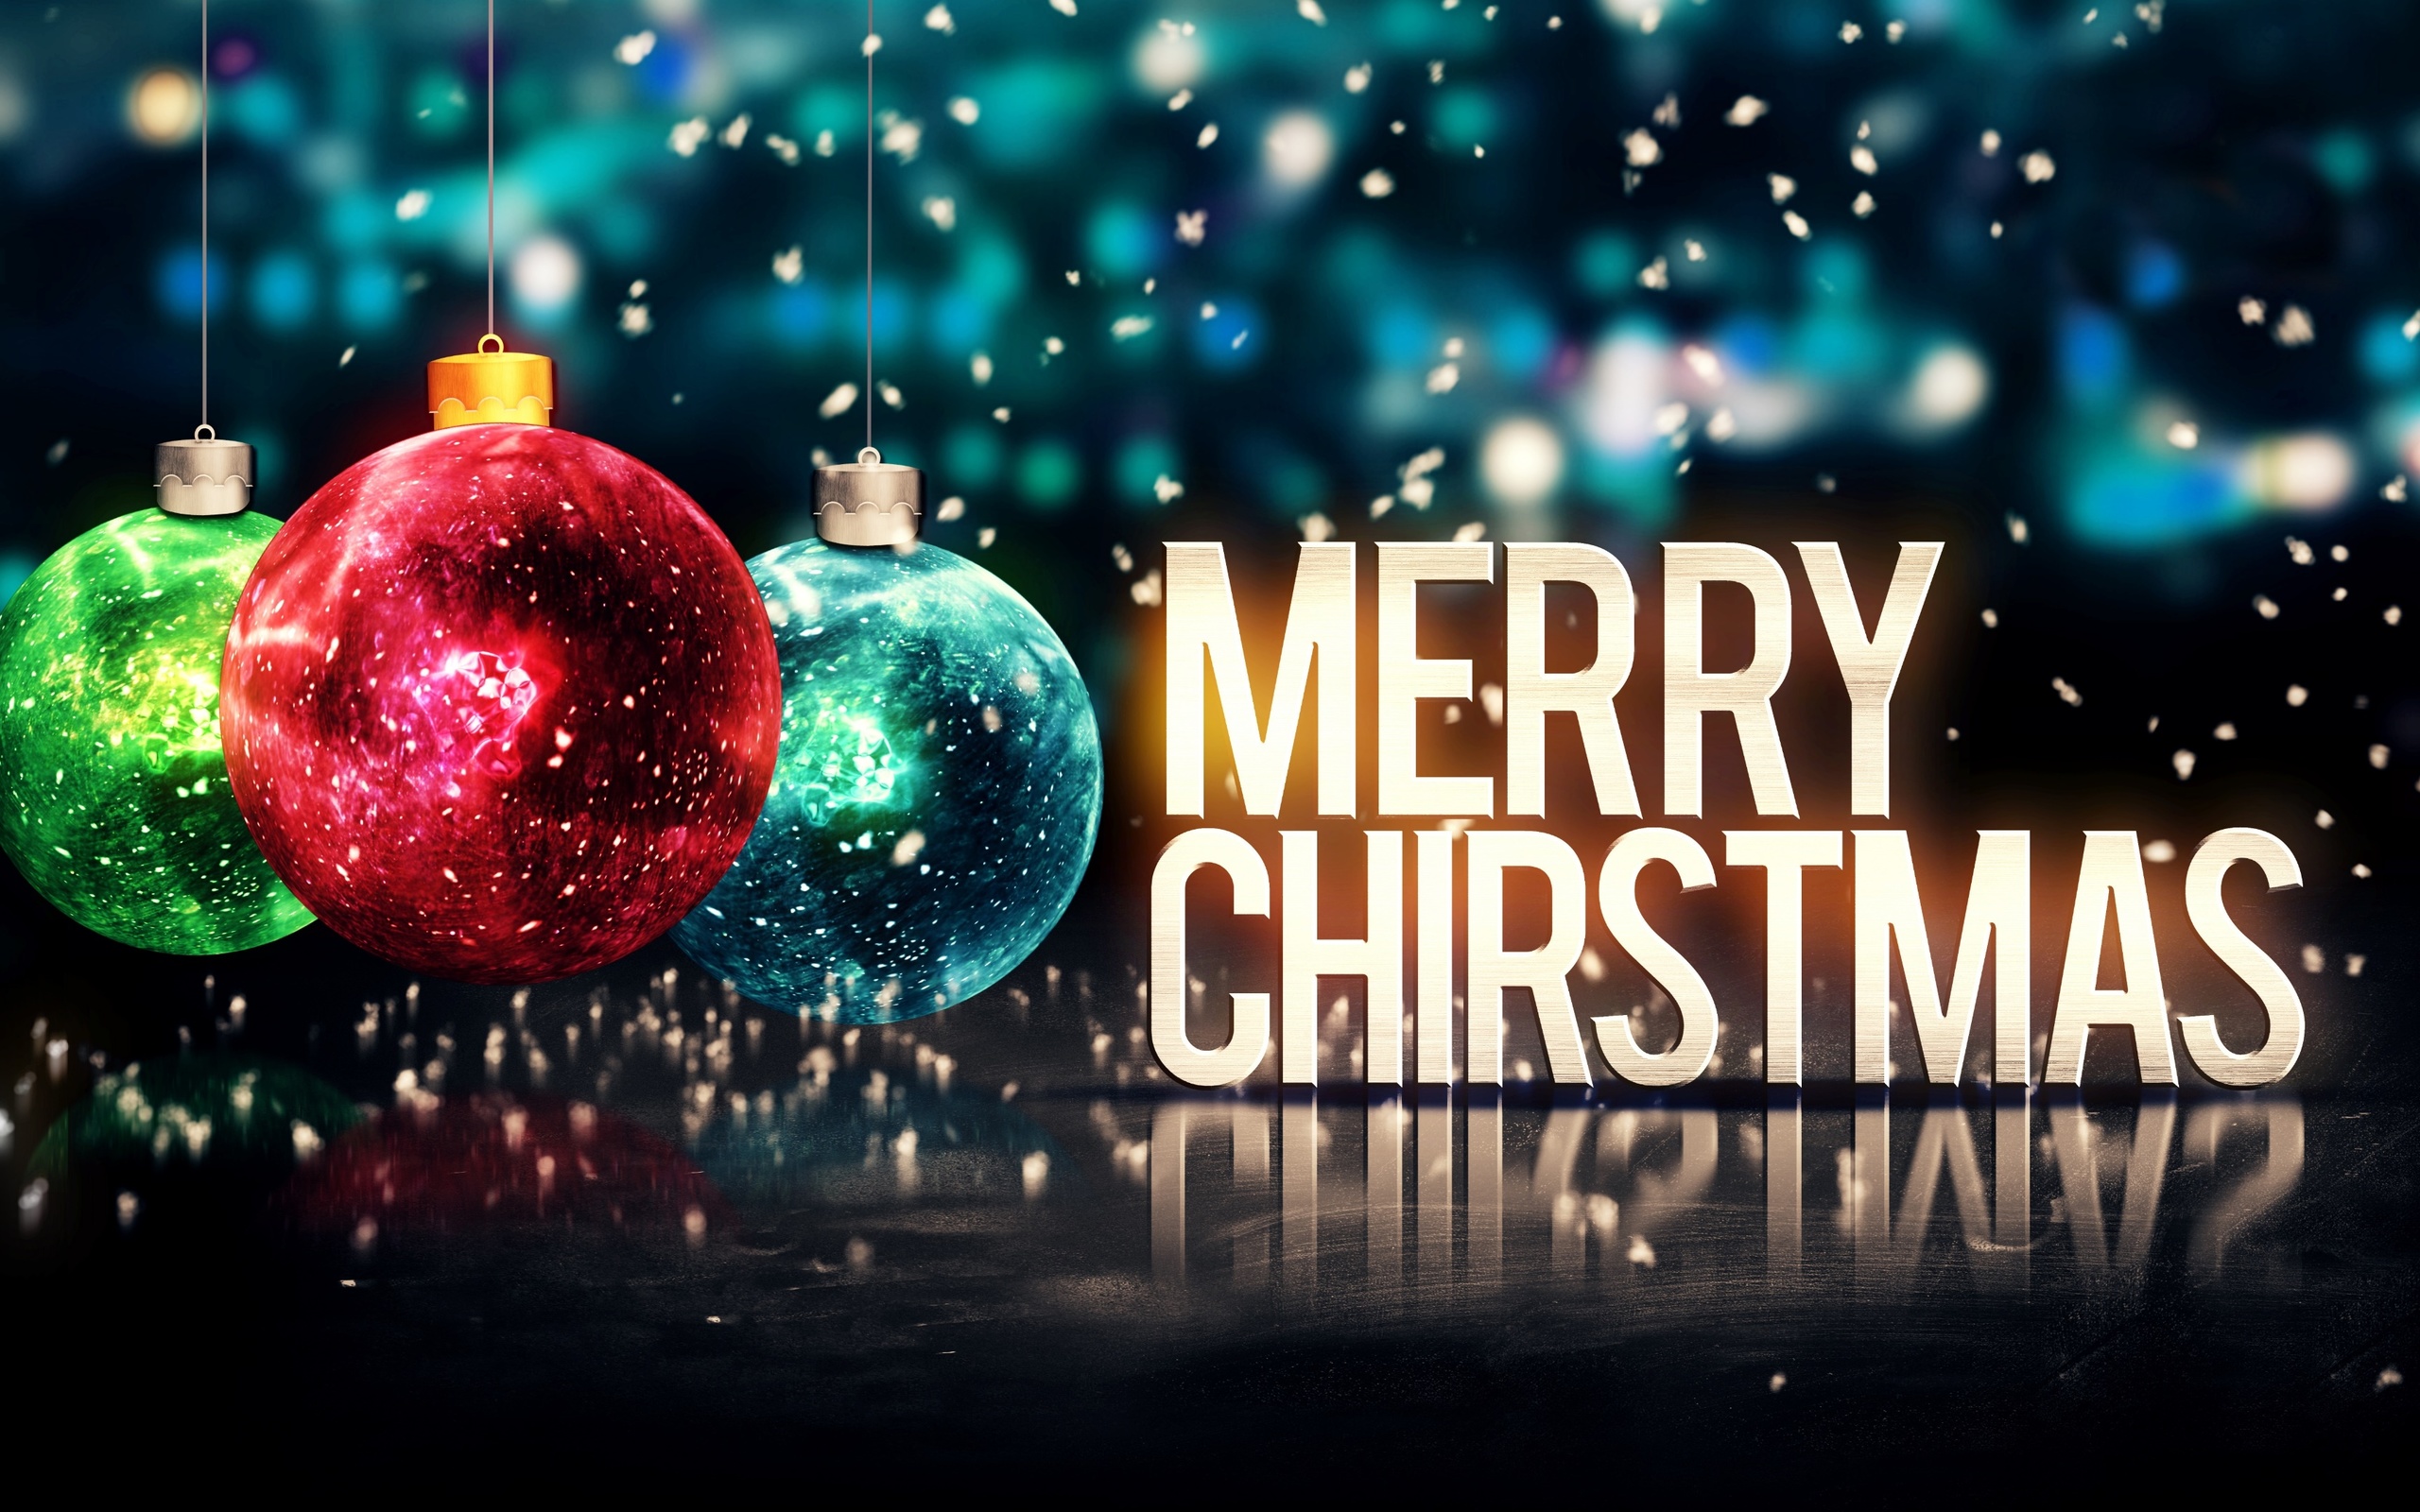 Merry Christmas 2019 Wishes - HD Wallpaper 